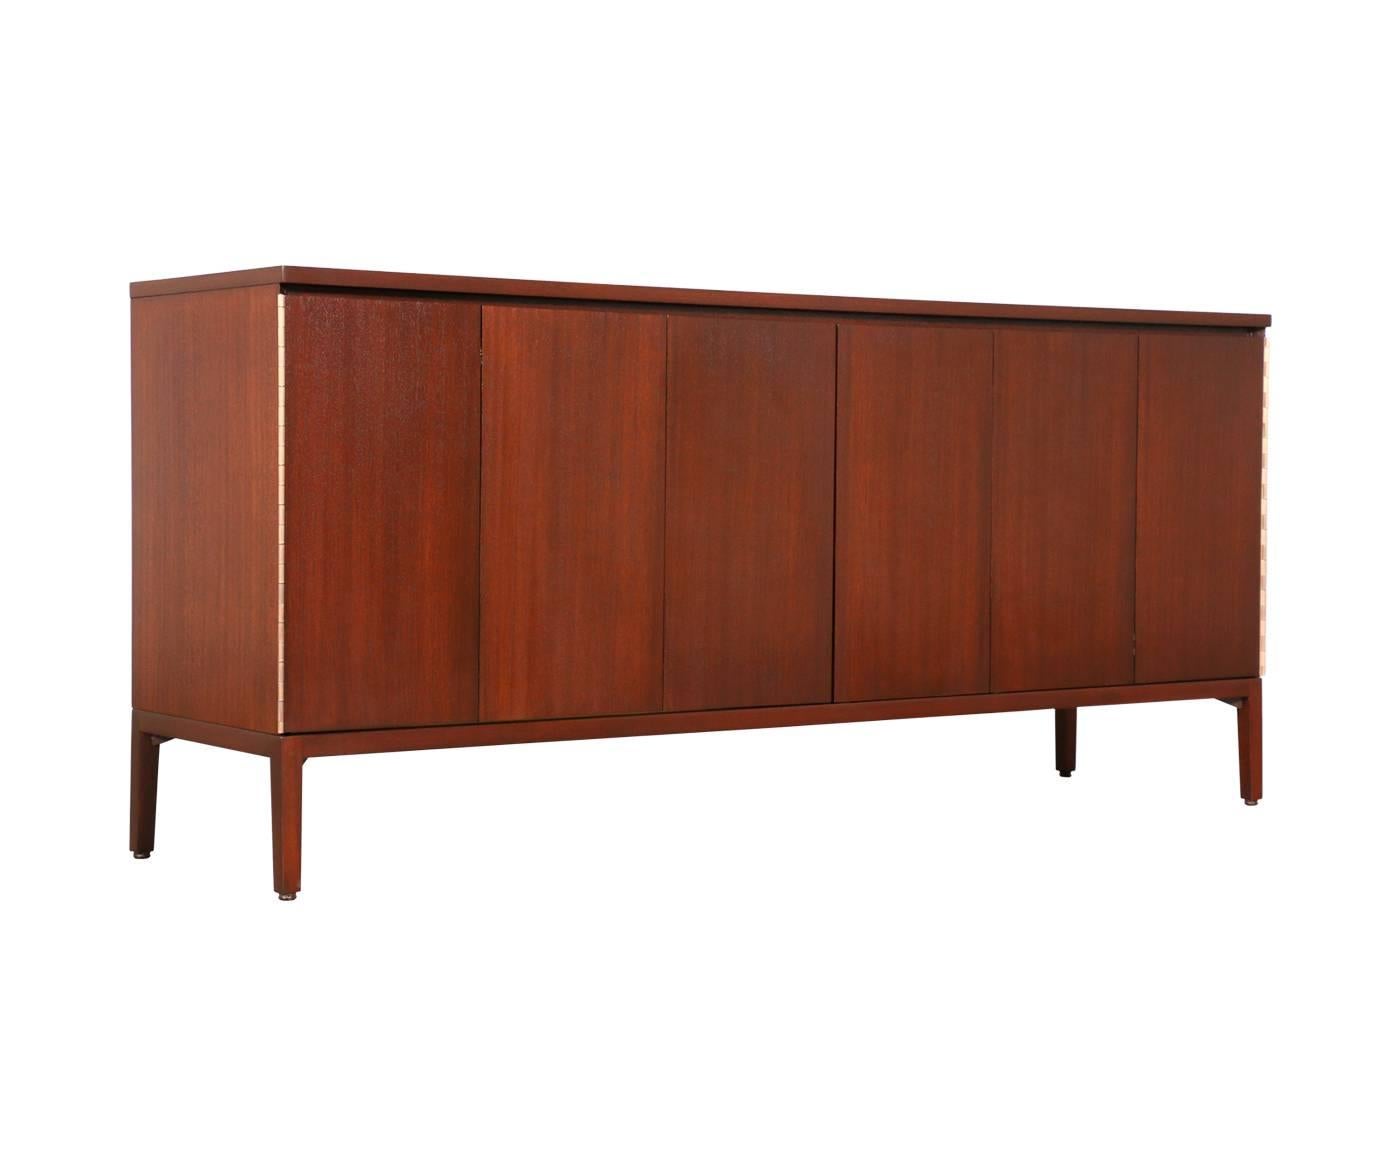 American Paul McCobb “Irwin Collection” Credenza with Bi-Folding Doors for Calvin Group